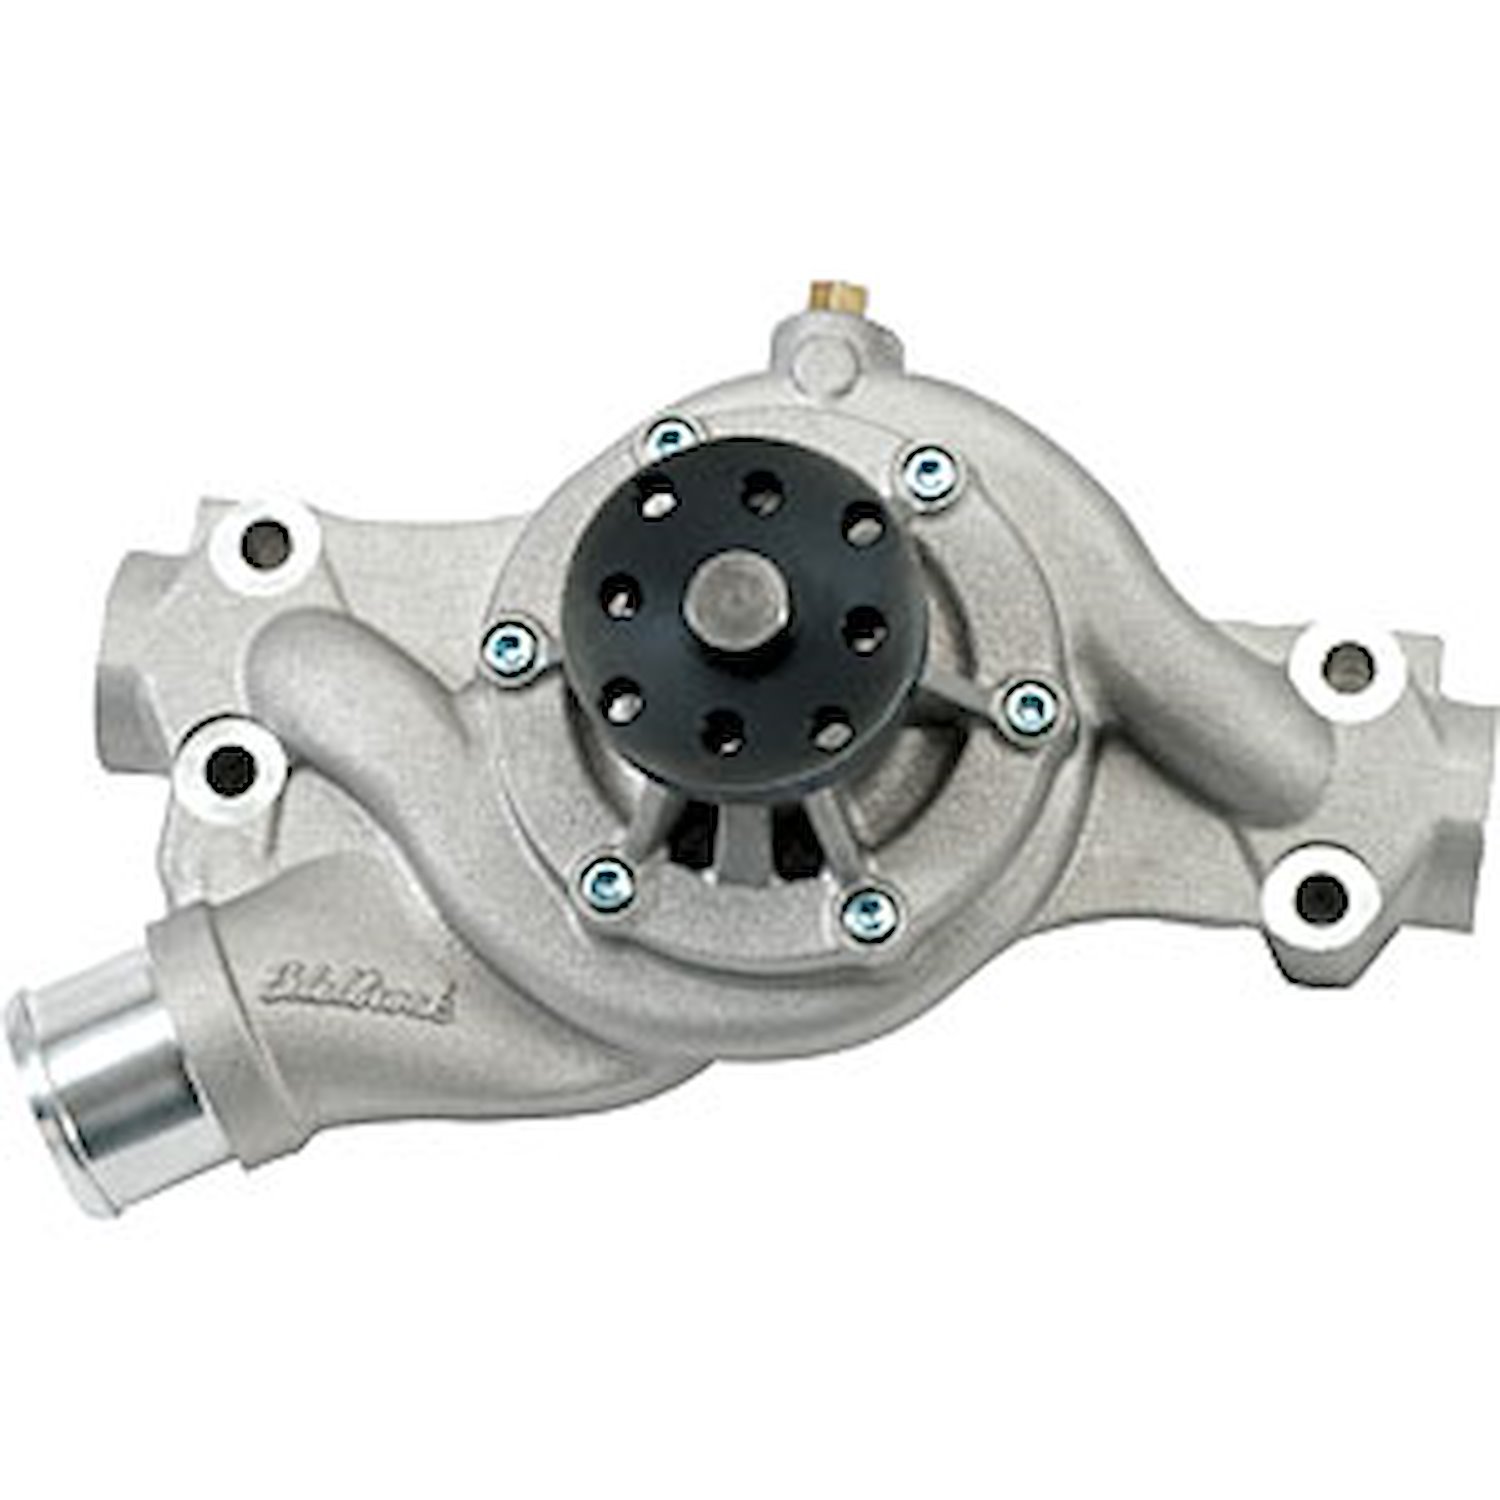 Victor Pro Series Racing Aluminum Water Pump for 1955-1995 Small Block Chevy